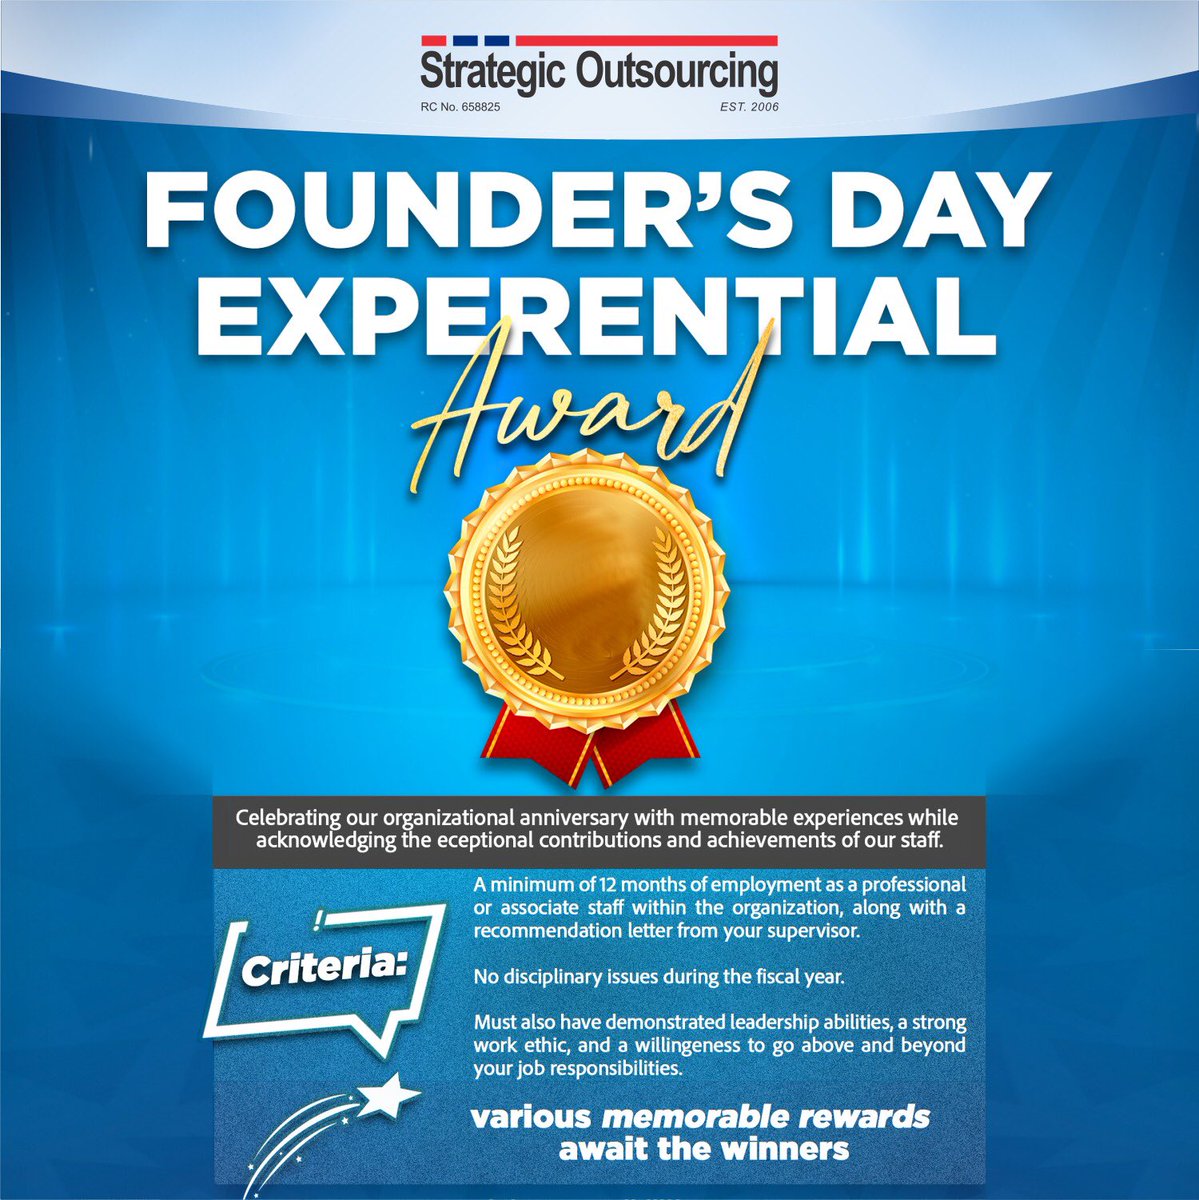 We are pleased to announce the 2024 edition of the Founder’s Day Experiential Award. Send a written statement by email to ExperientialAward@solnigeria.com no later than 10th June 2024 #foundersday #solnigeria #solmedia #award #experentialaward #winners #celebrating